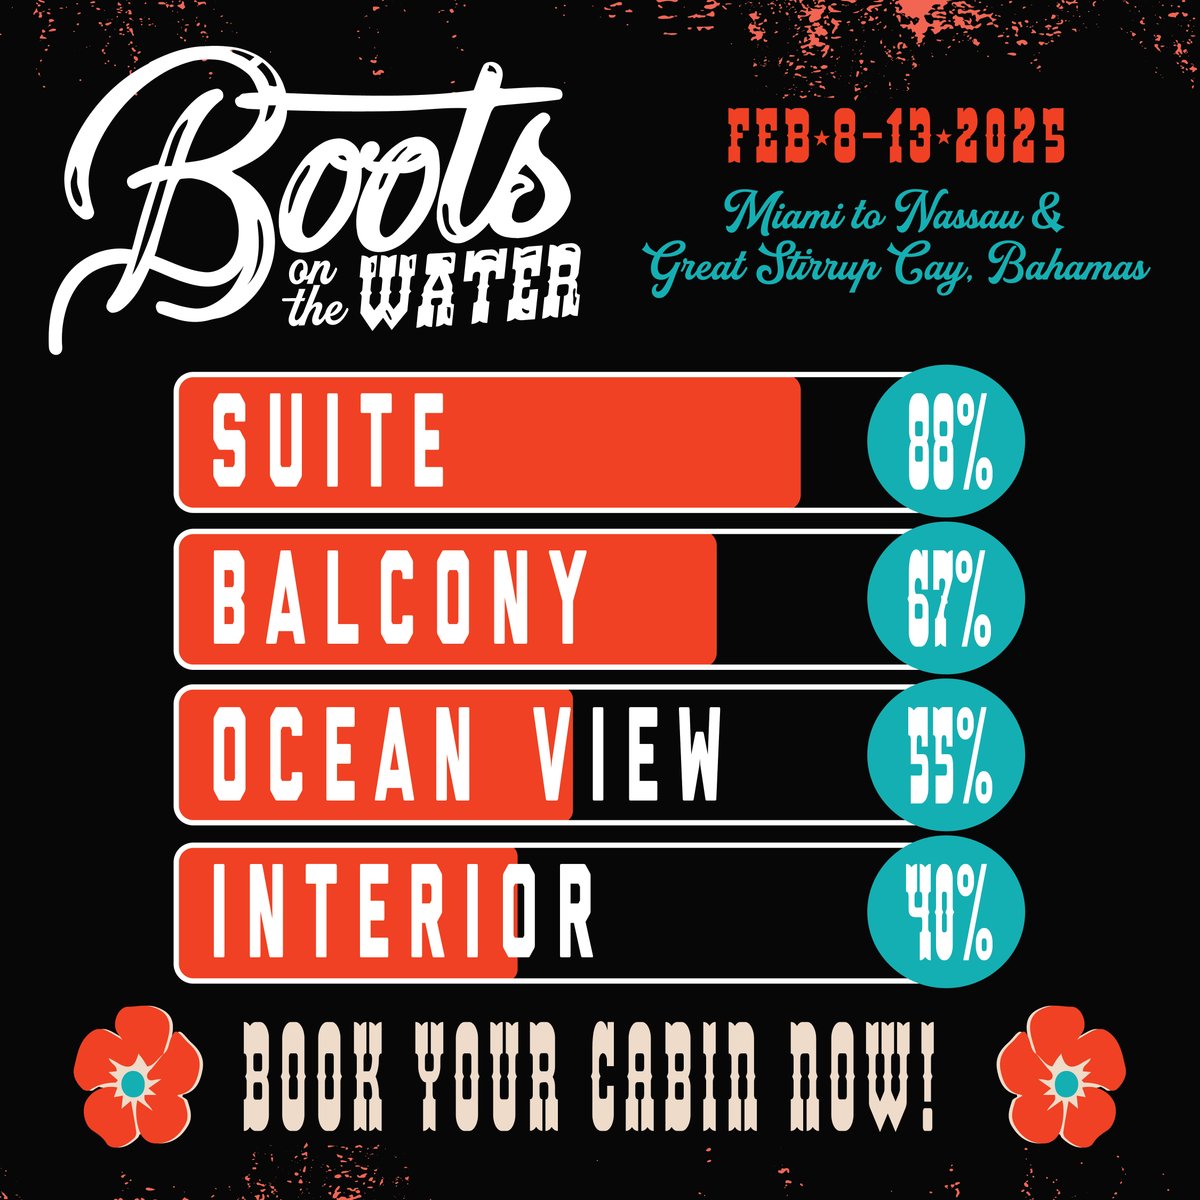 🏁 Ready, set, book! Over 60% of our cabins are already taken. ⏰ Don't miss out on your dream vacation alongside Big & Rich ft. Gretchen Wilson, Craig Morgan, Jo Dee Messina and more! Book now at BootsontheWaterCruise.com.